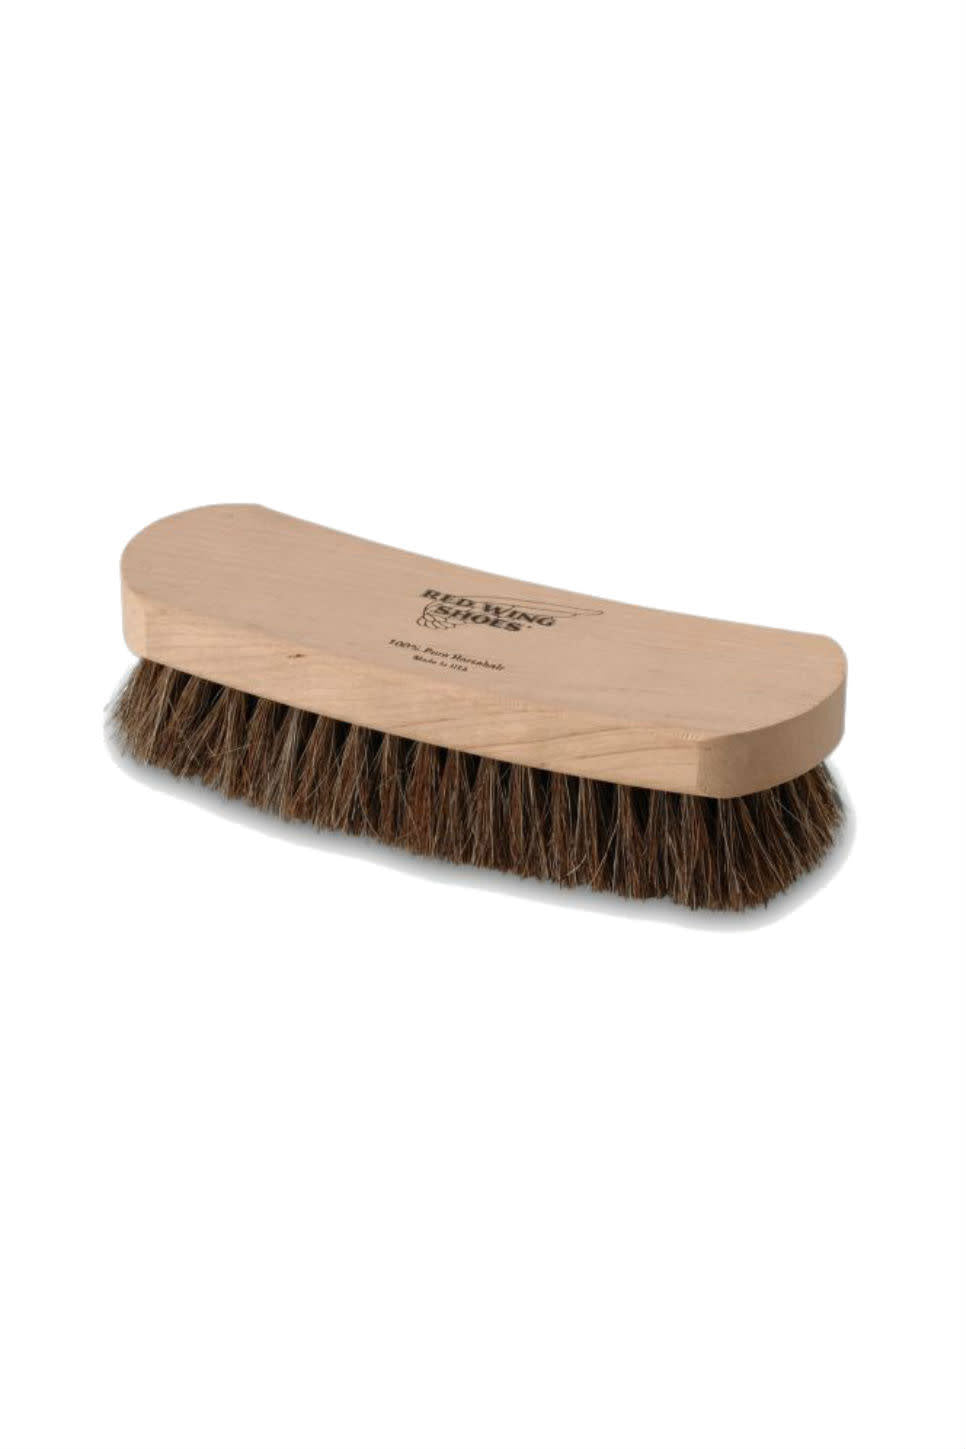 Red Wing - Boot Brush